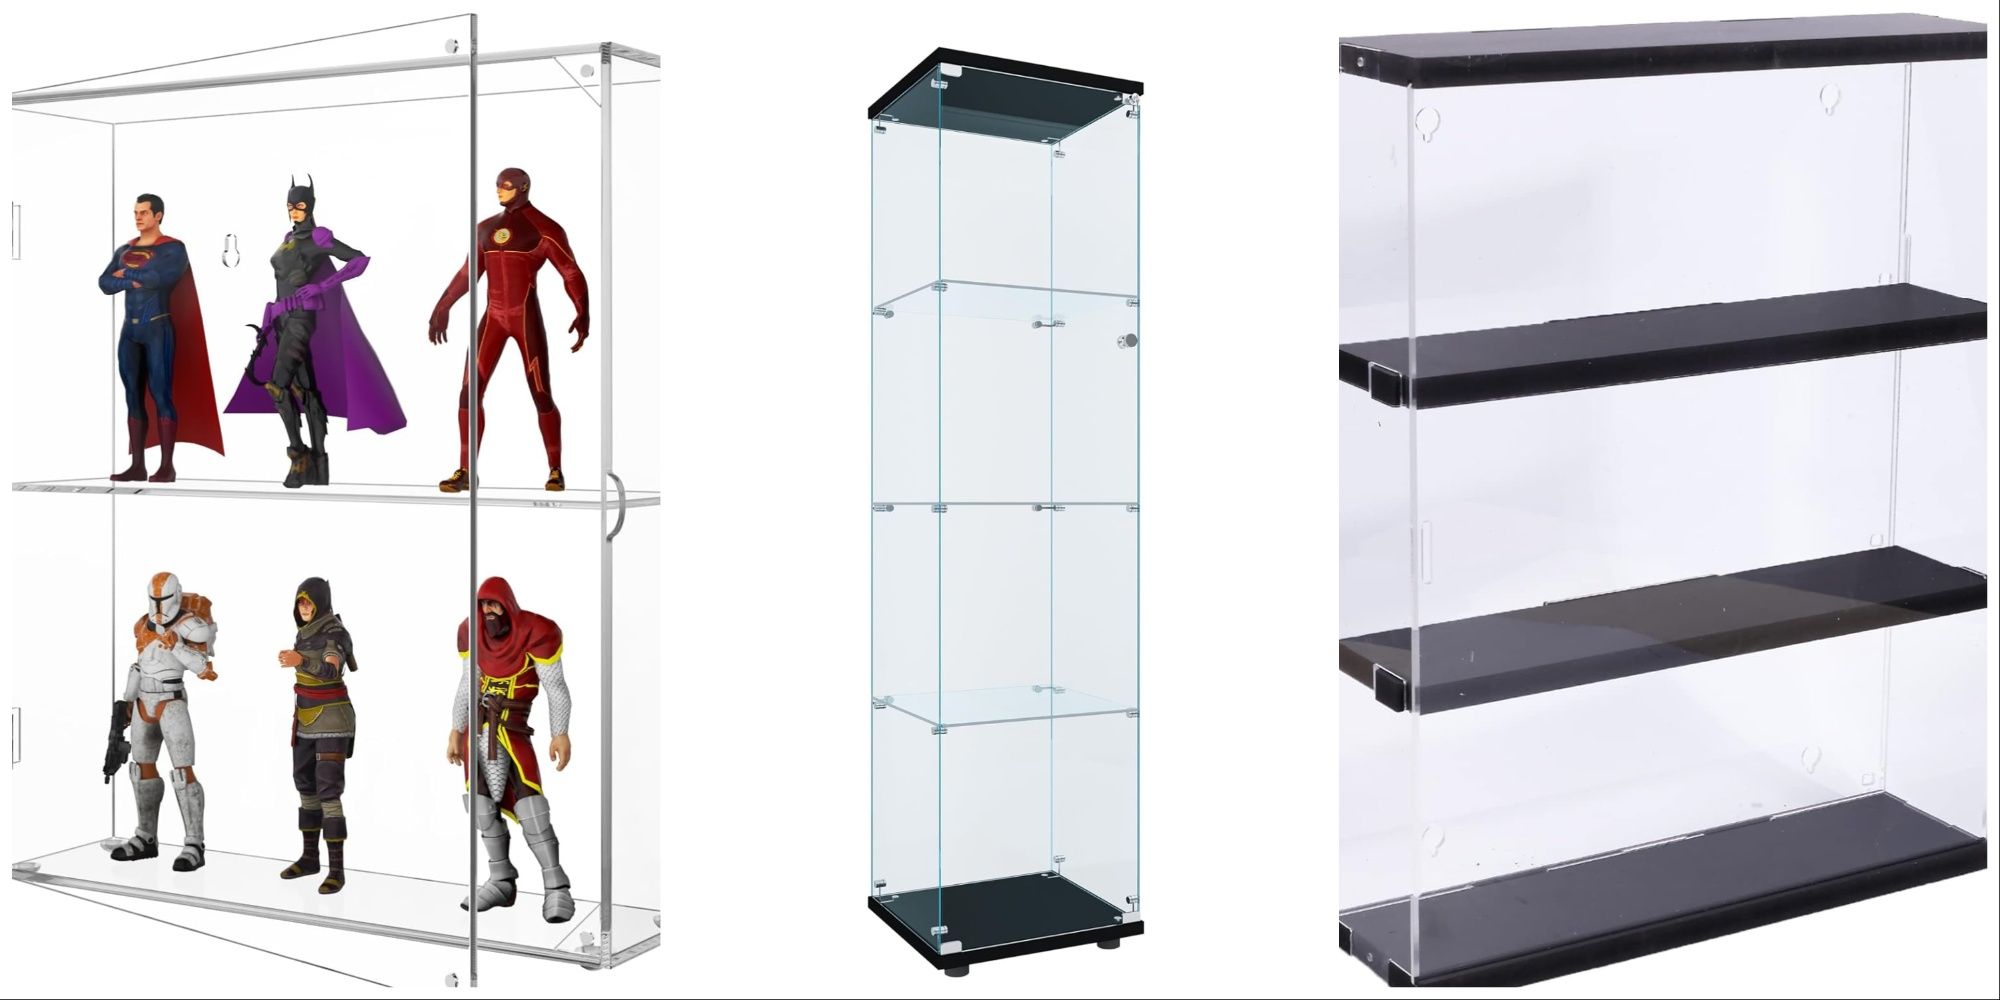 Acrylic vs Glass Shelves: Which is best?